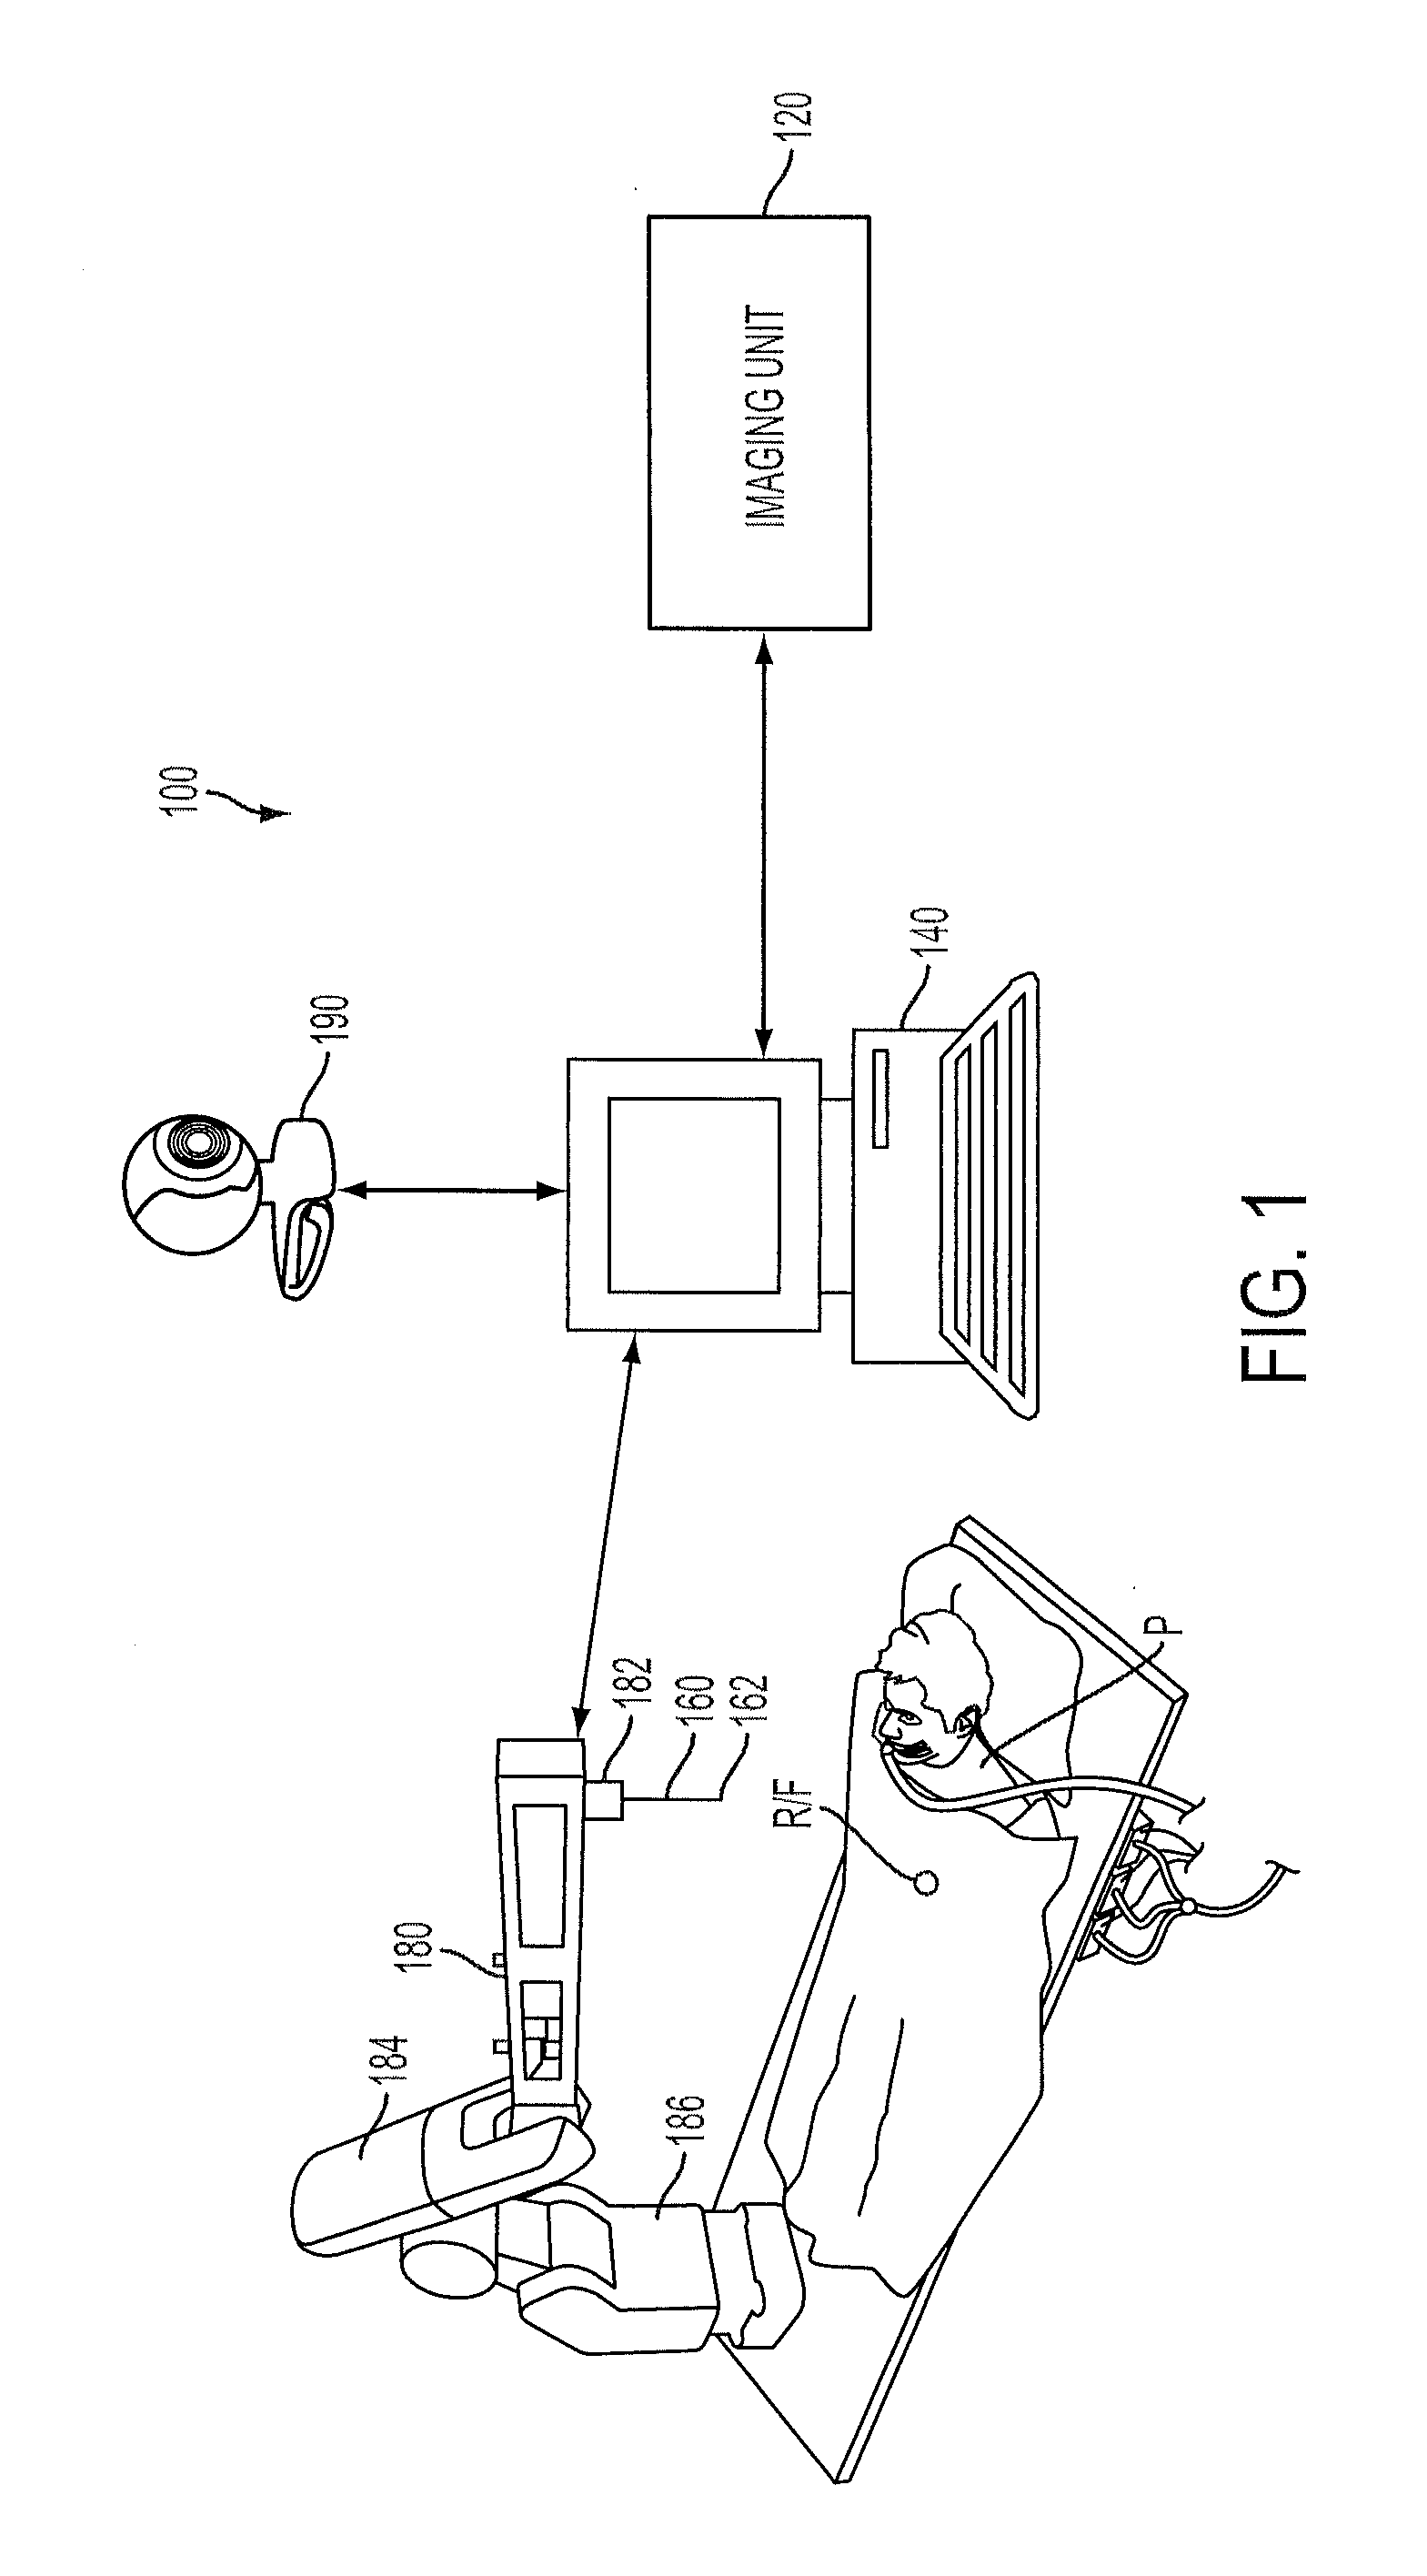 System and method for ct-guided needle biopsy